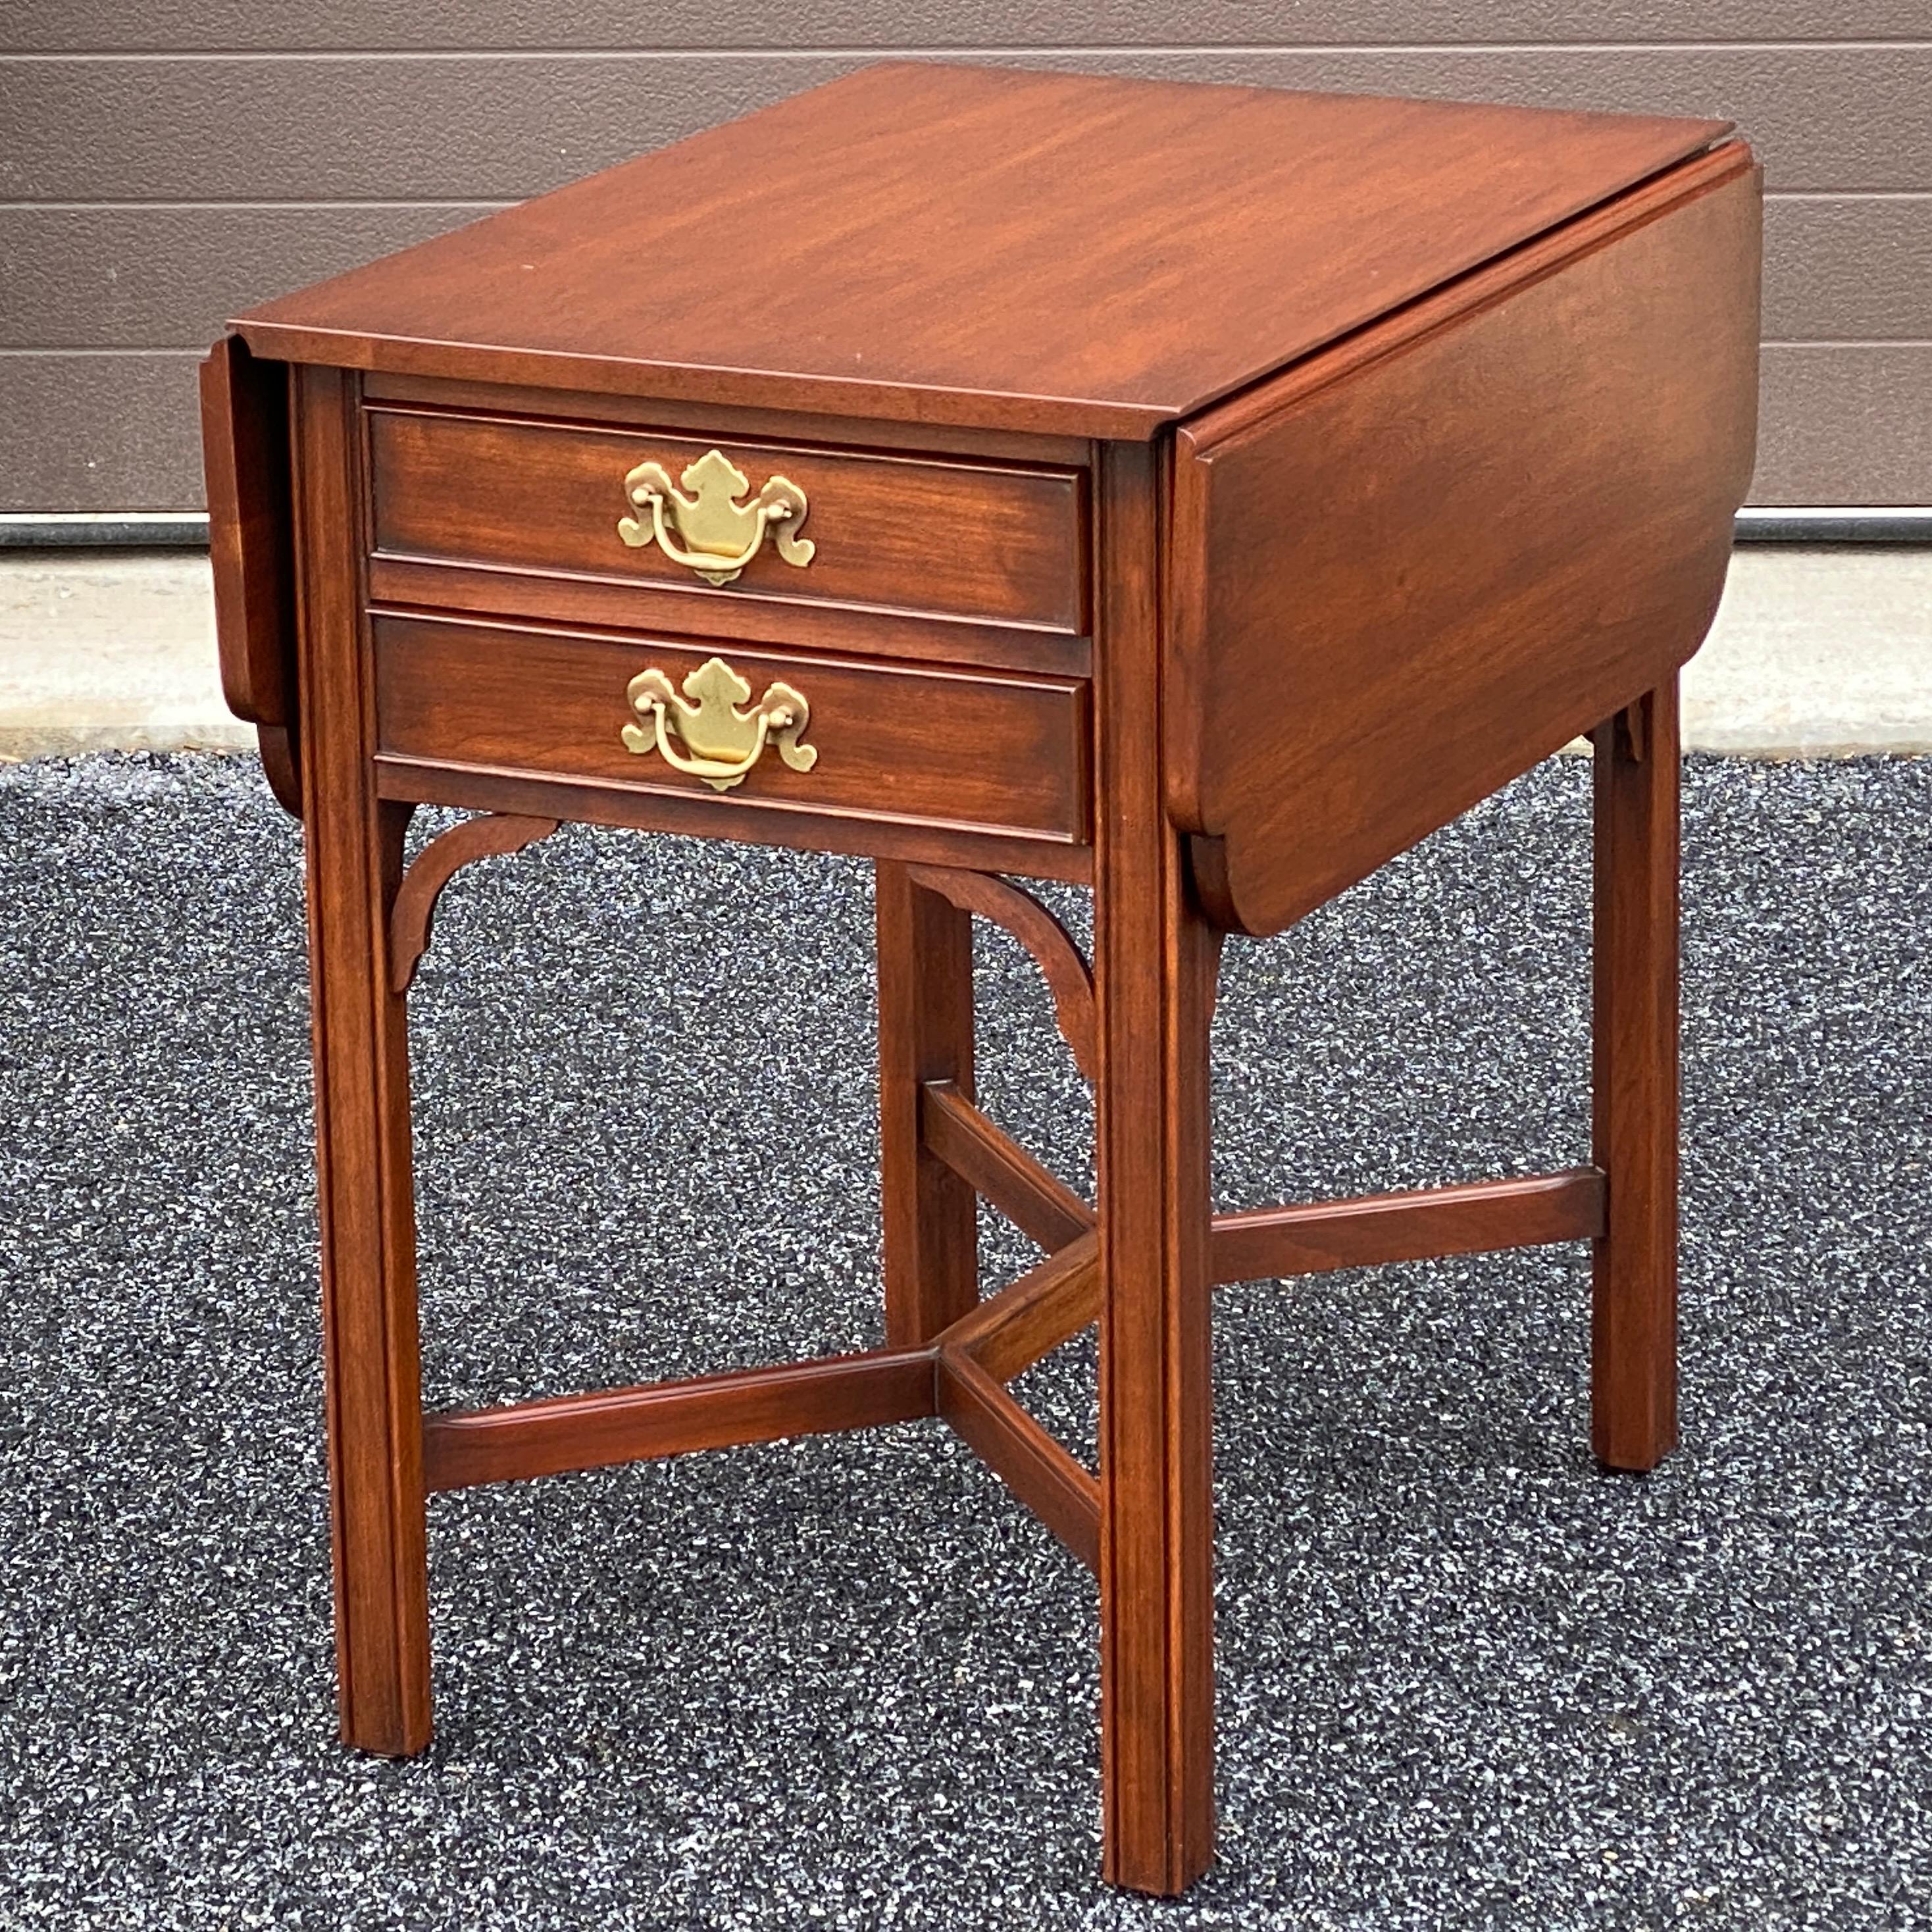 Top quality vintage Henkel Harris Chippendale Solid Wild Black Cherry Drop Leaf Chairside Pembroke Table circa 1981.
Model 5425
Finish 24
35.25”w with both leaves up